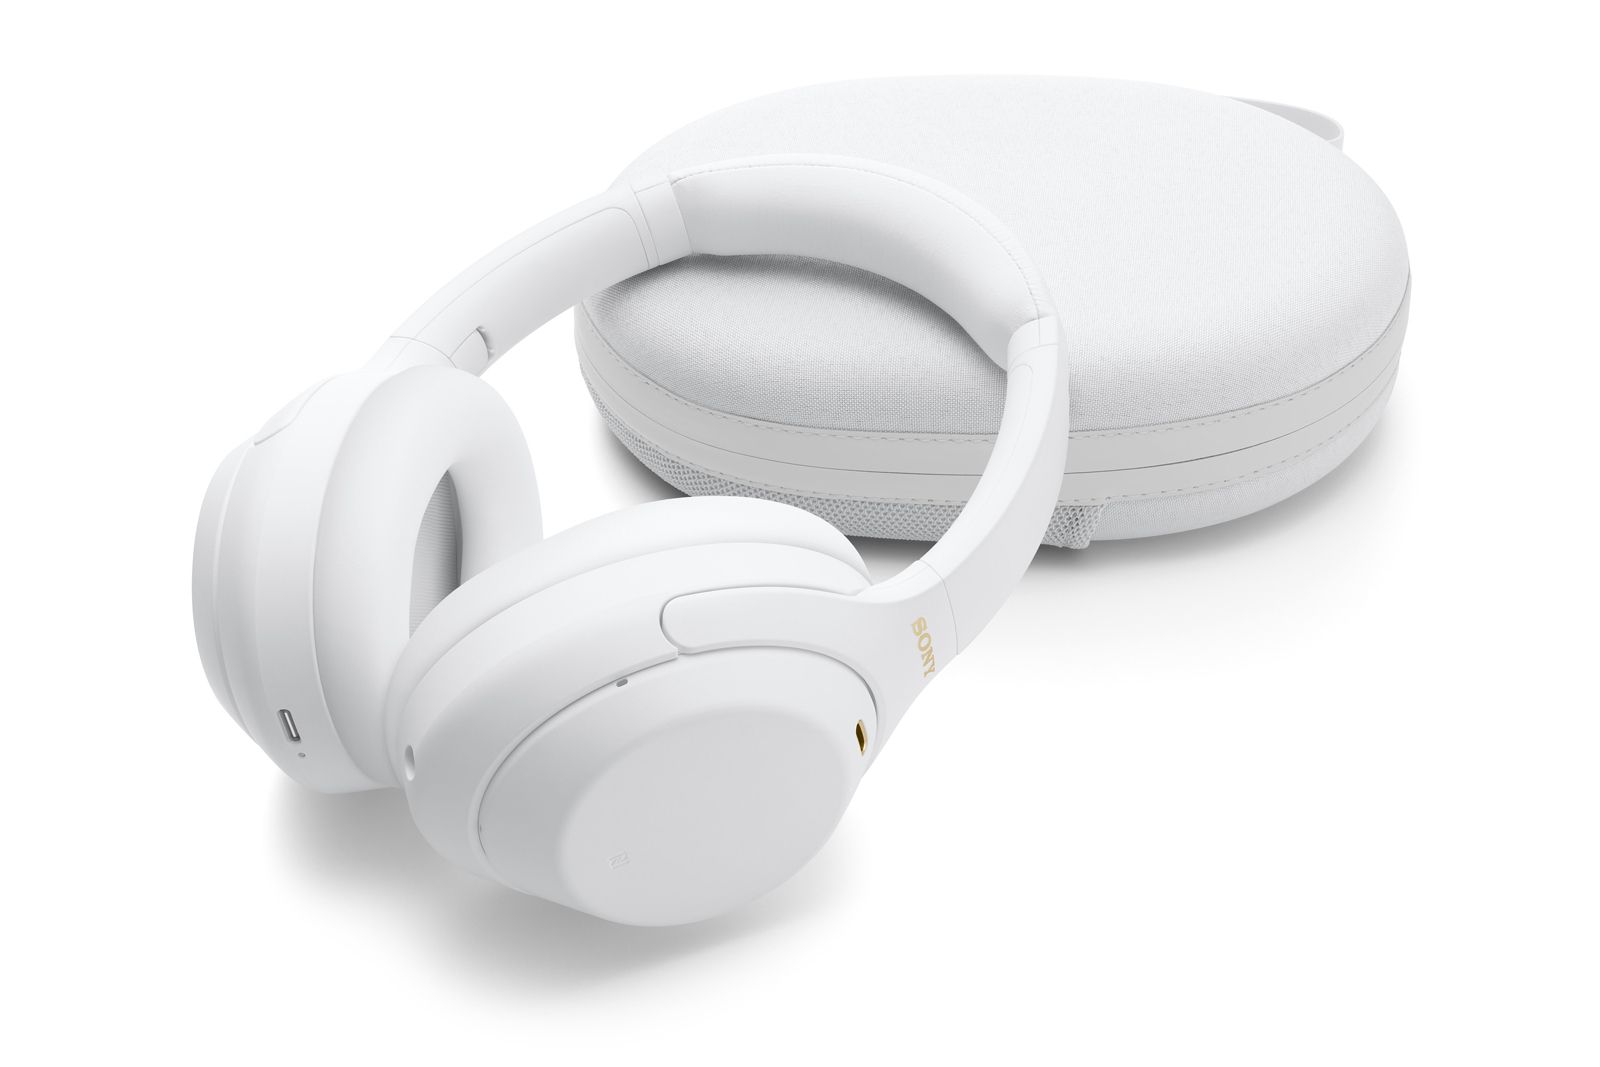 Sony debuts limited edition 'Silent White' version of its 